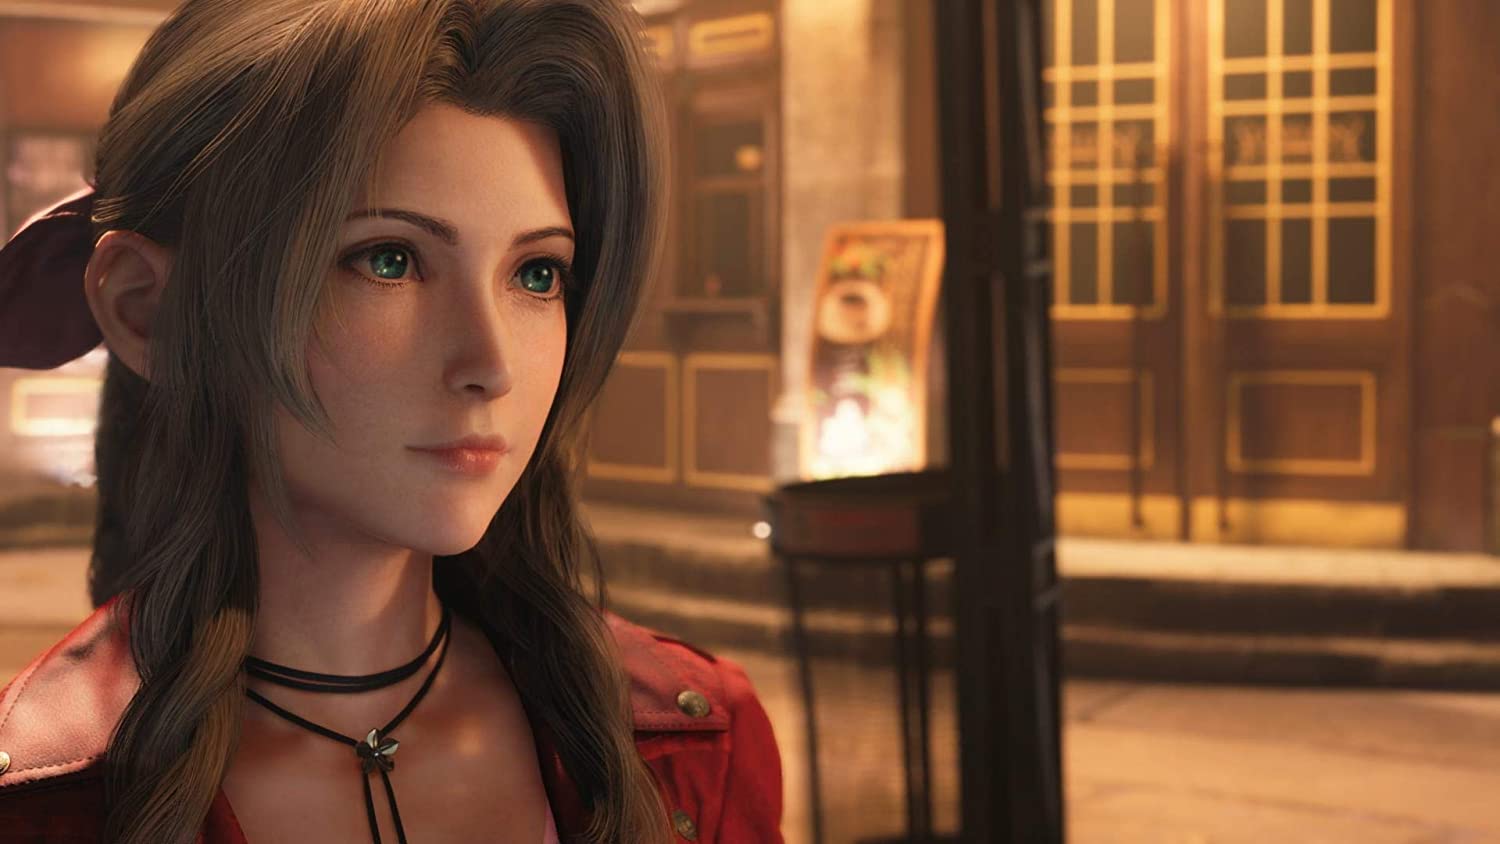 First Nude Mod released for Final Fantasy 7 Remake Intergrade